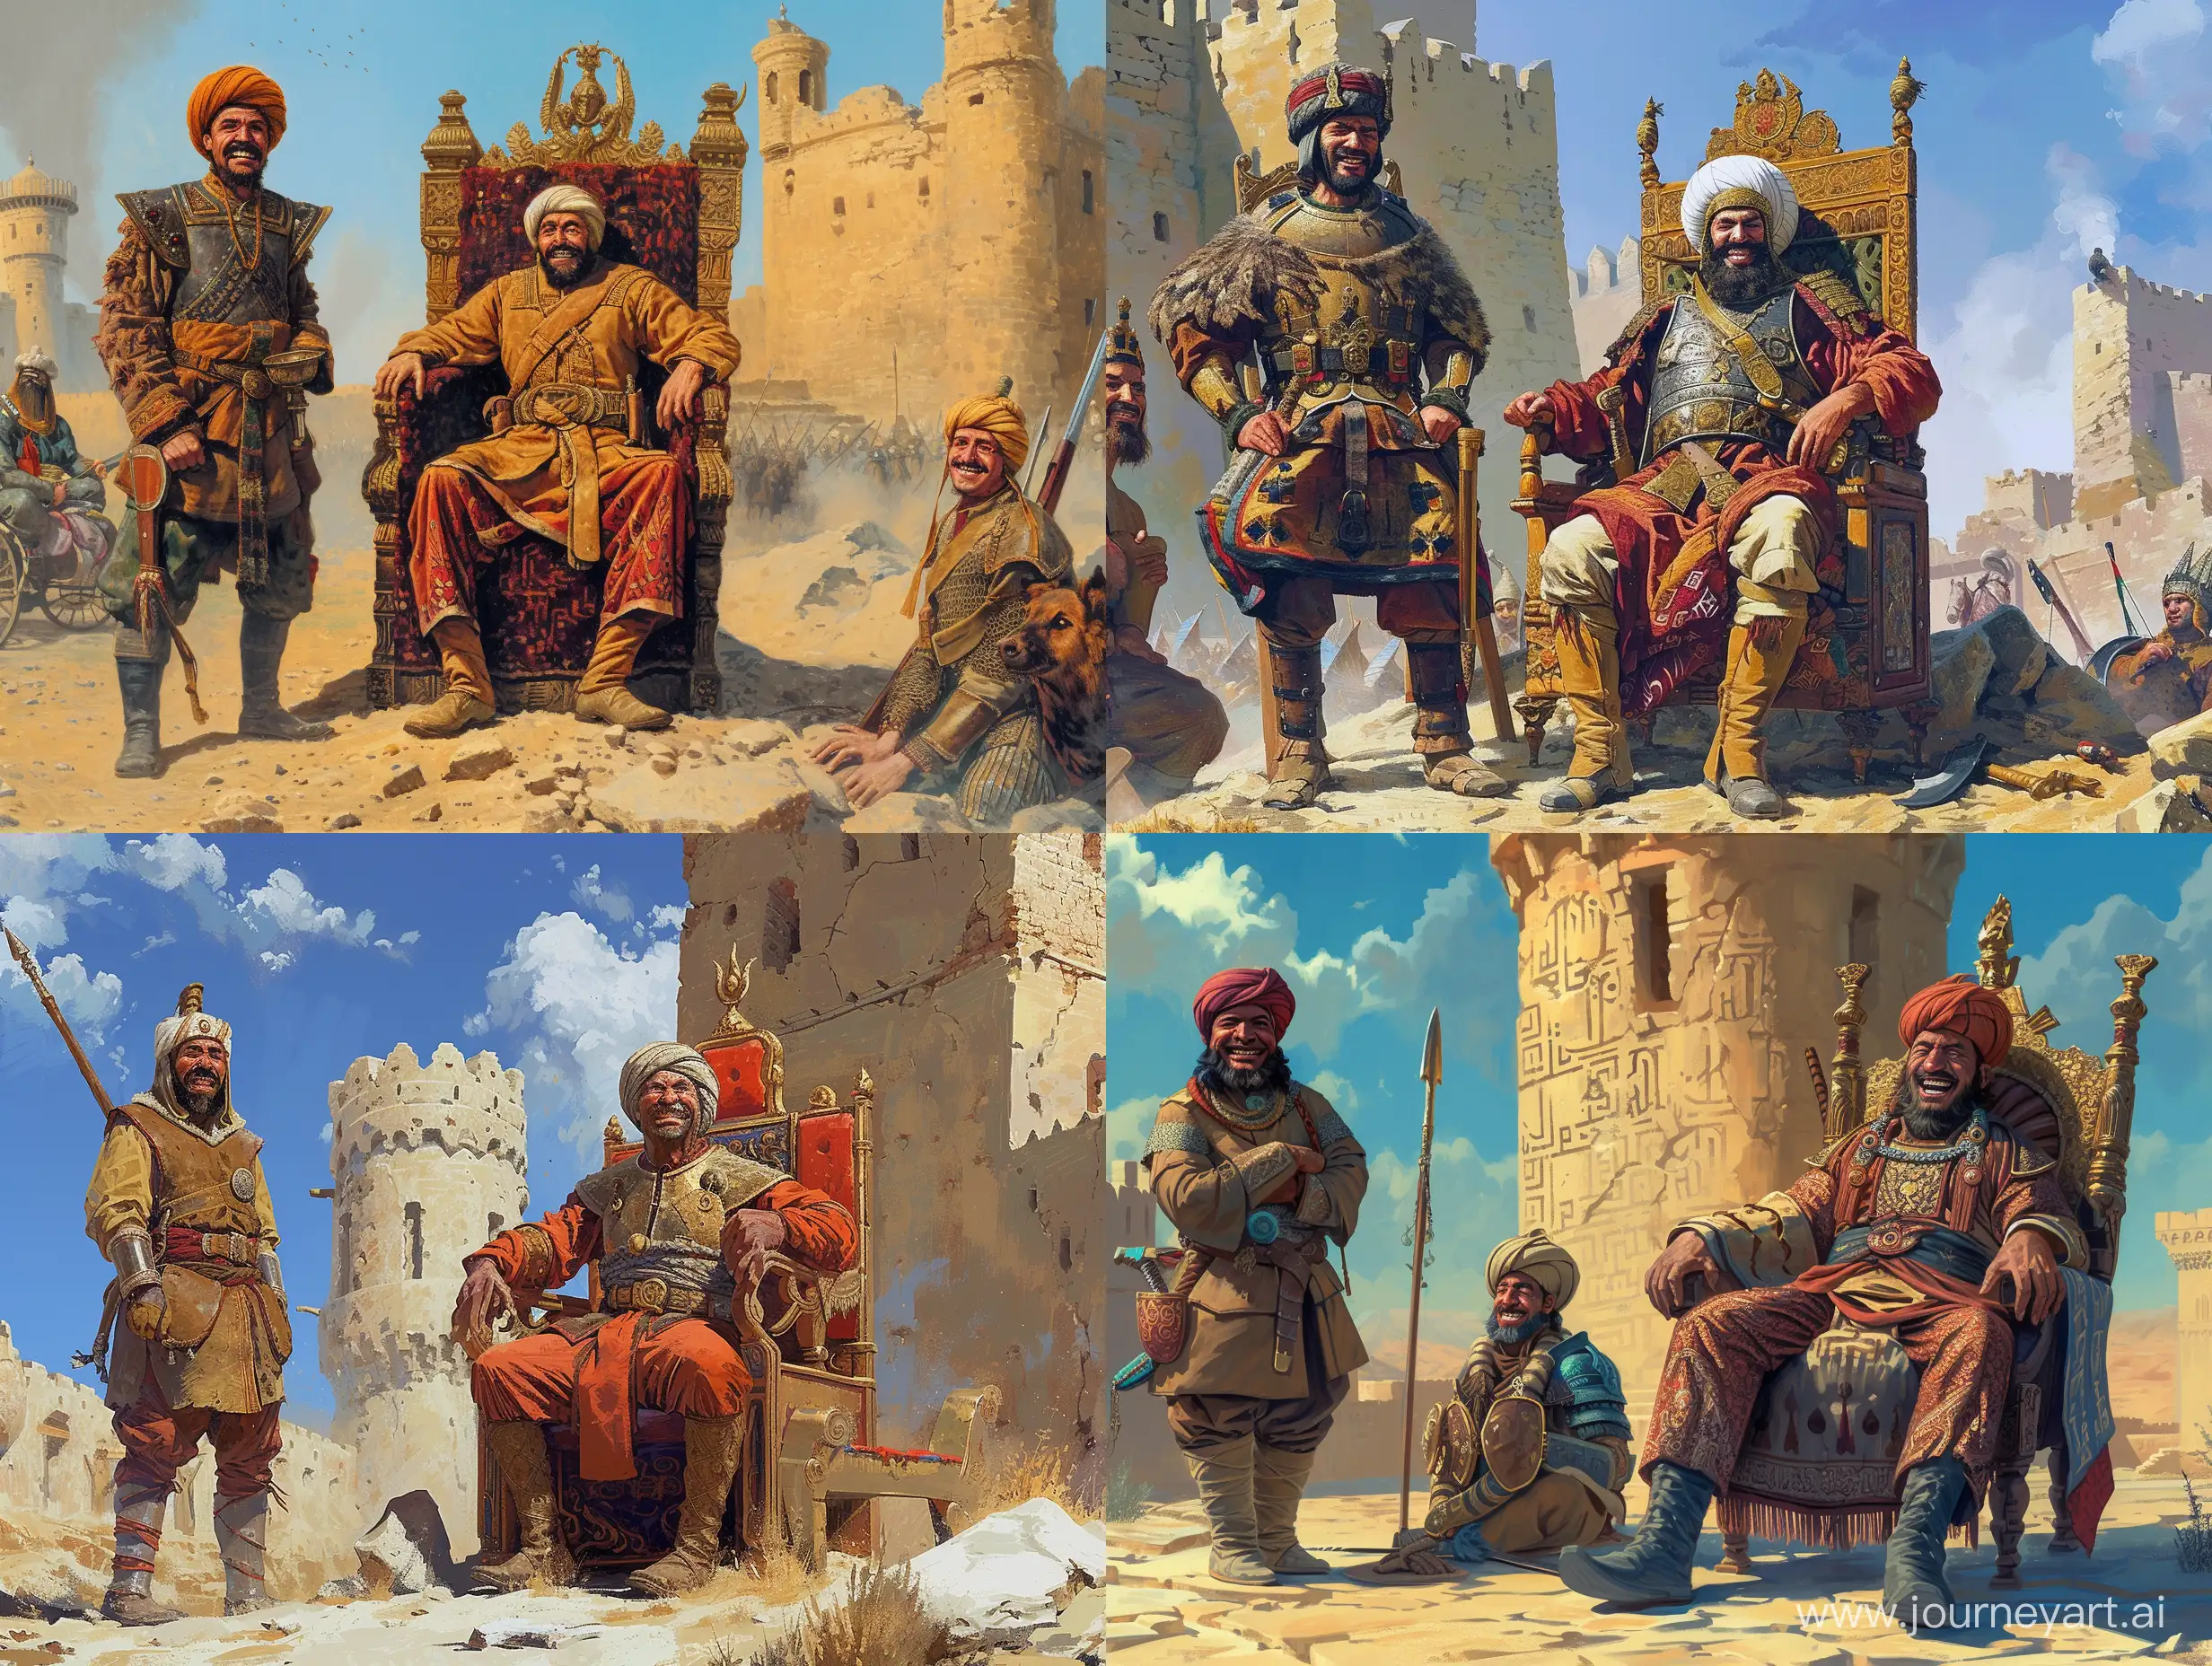 After occupying the Persian castle, the Arab soldier sits down on the throne of the Persian Empire in the Bam citadel with a frightening smile, while a smiling Mongol soldier stands next to the chair on the left.